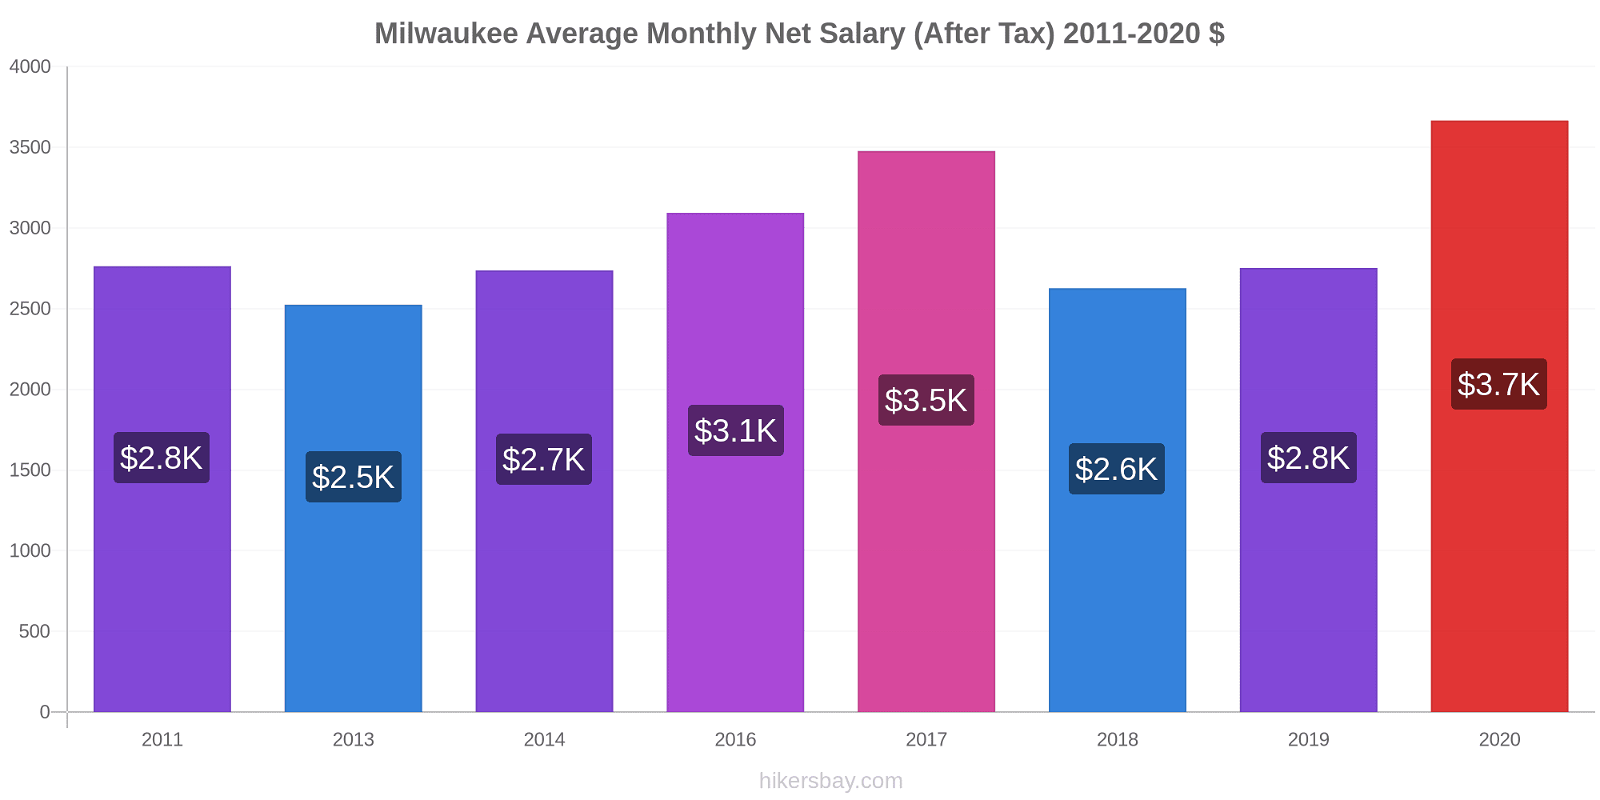 Milwaukee price changes Average Monthly Net Salary (After Tax) hikersbay.com